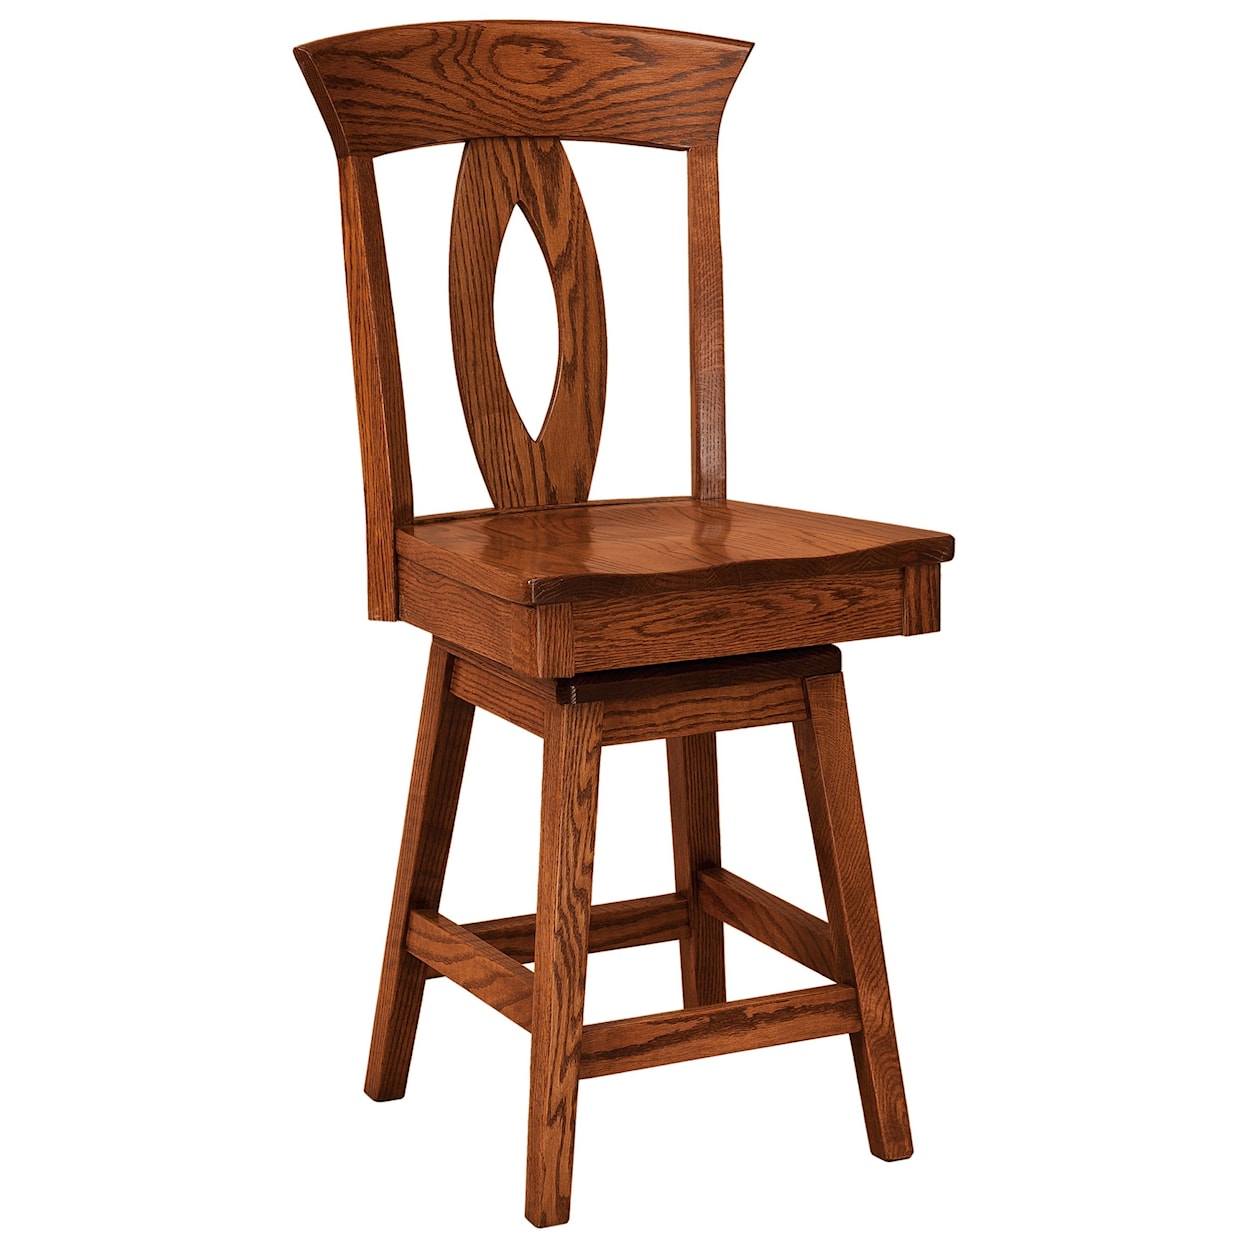 F&N Woodworking Brookfield Swivel Counter Height Stool - Leather Seat